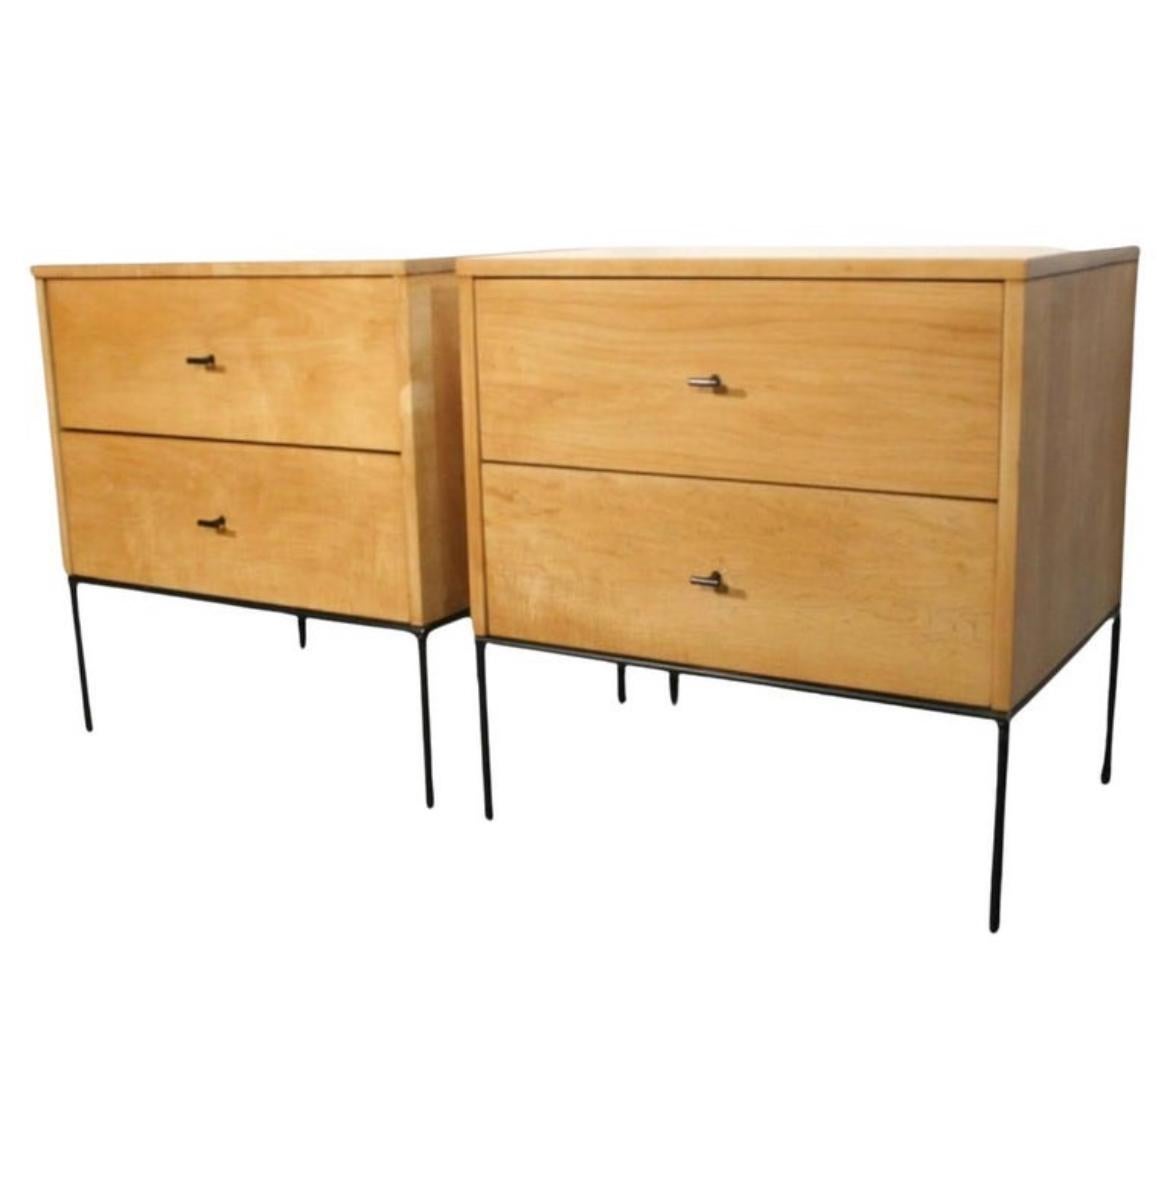 Beautiful pair of Paul McCobb 1950s #1503 blonde maple nightstands end tables double-drawer planner Group. Black steel T pull knobs.Finished in raw blonde maple. Very modern designed pair of nightstands with iron base with 4 legs. All solid maple.